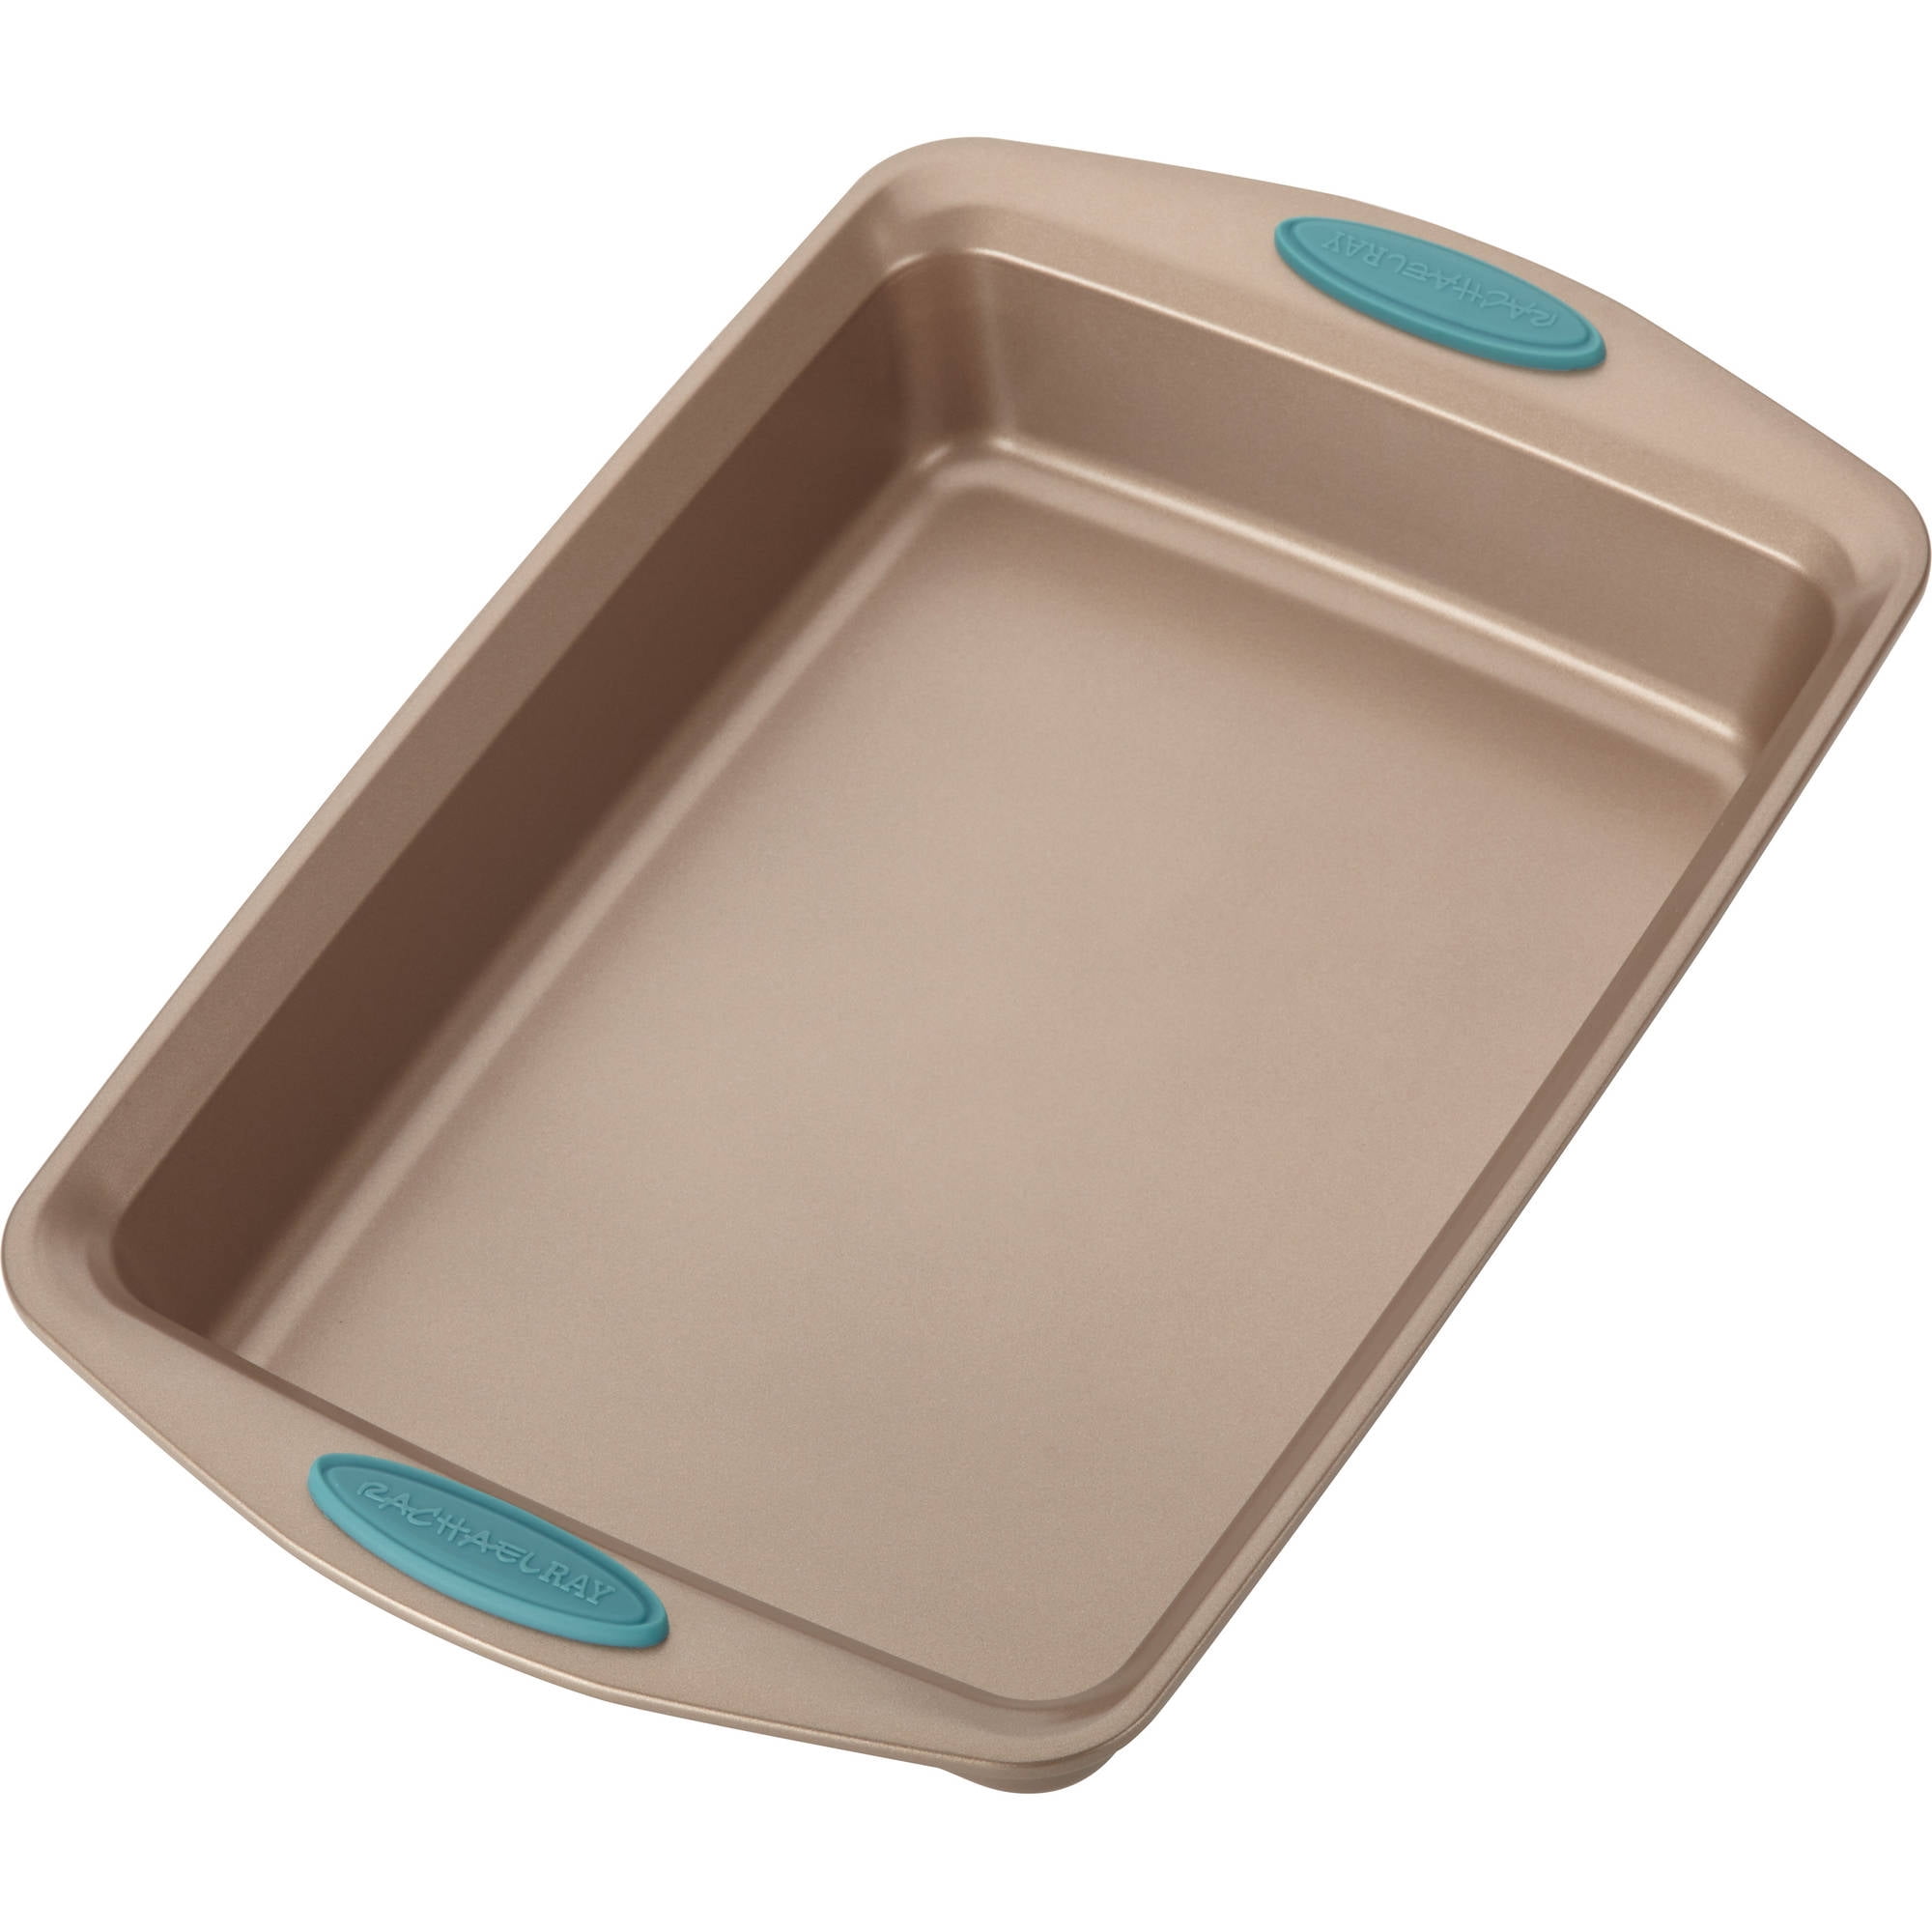 Rachael Ray Nonstick Bakeware 12-Cup Muffin and Cupcake Pan - Bed Bath &  Beyond - 29067694